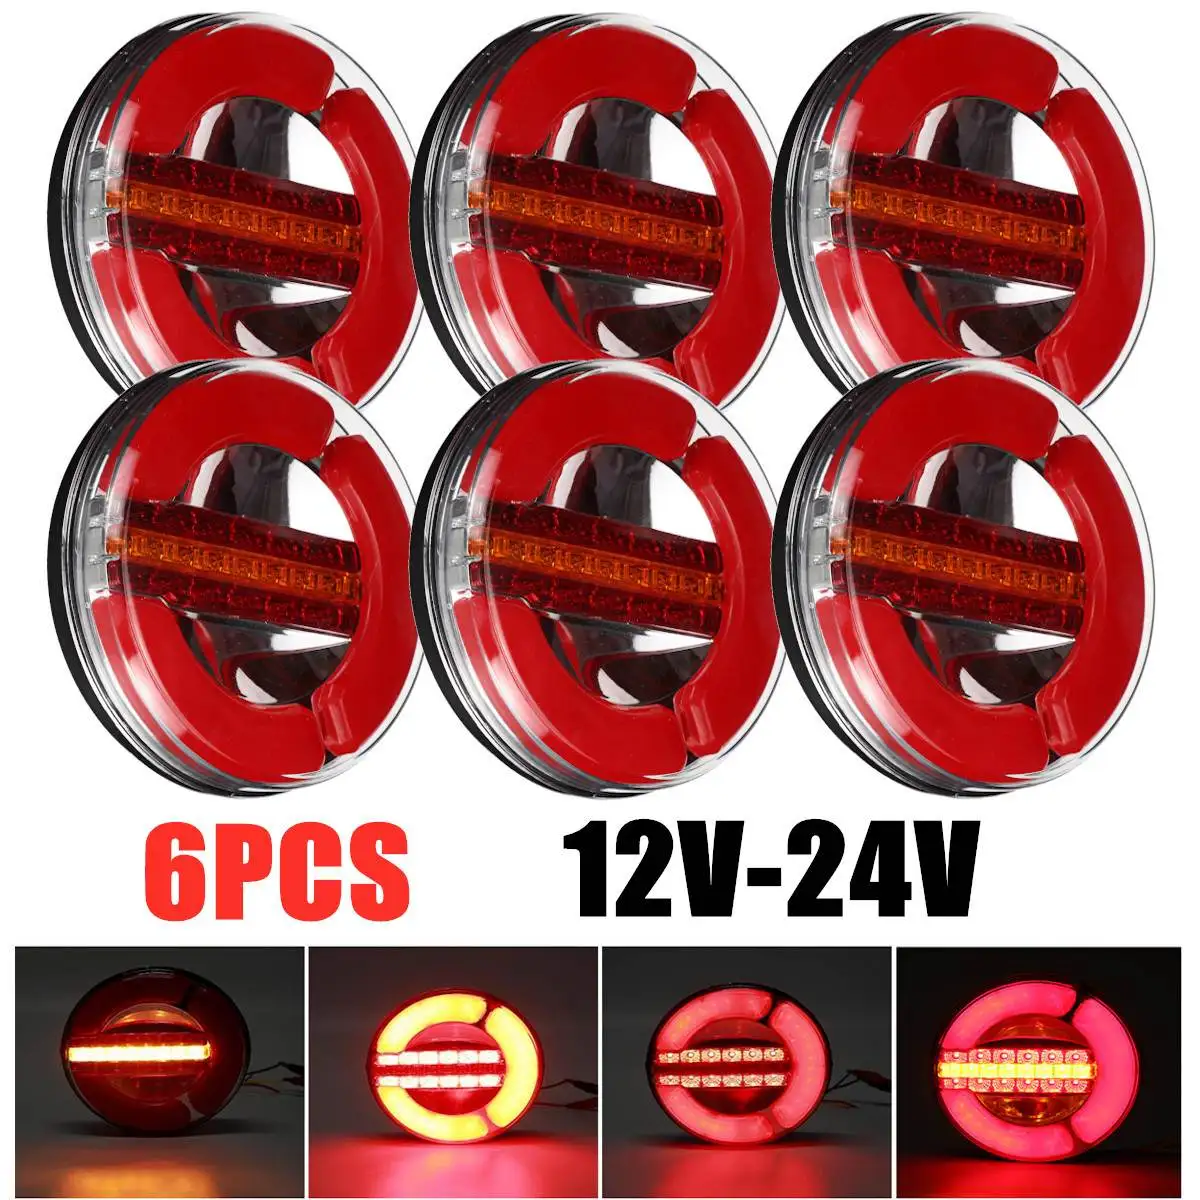 

6x 12-24V LED Truck Taillight For Car Trailer Lorry RV Bus 4in1 Dynamic Tail Trun Signal Reverse Lamp Rear Brake Stop Light